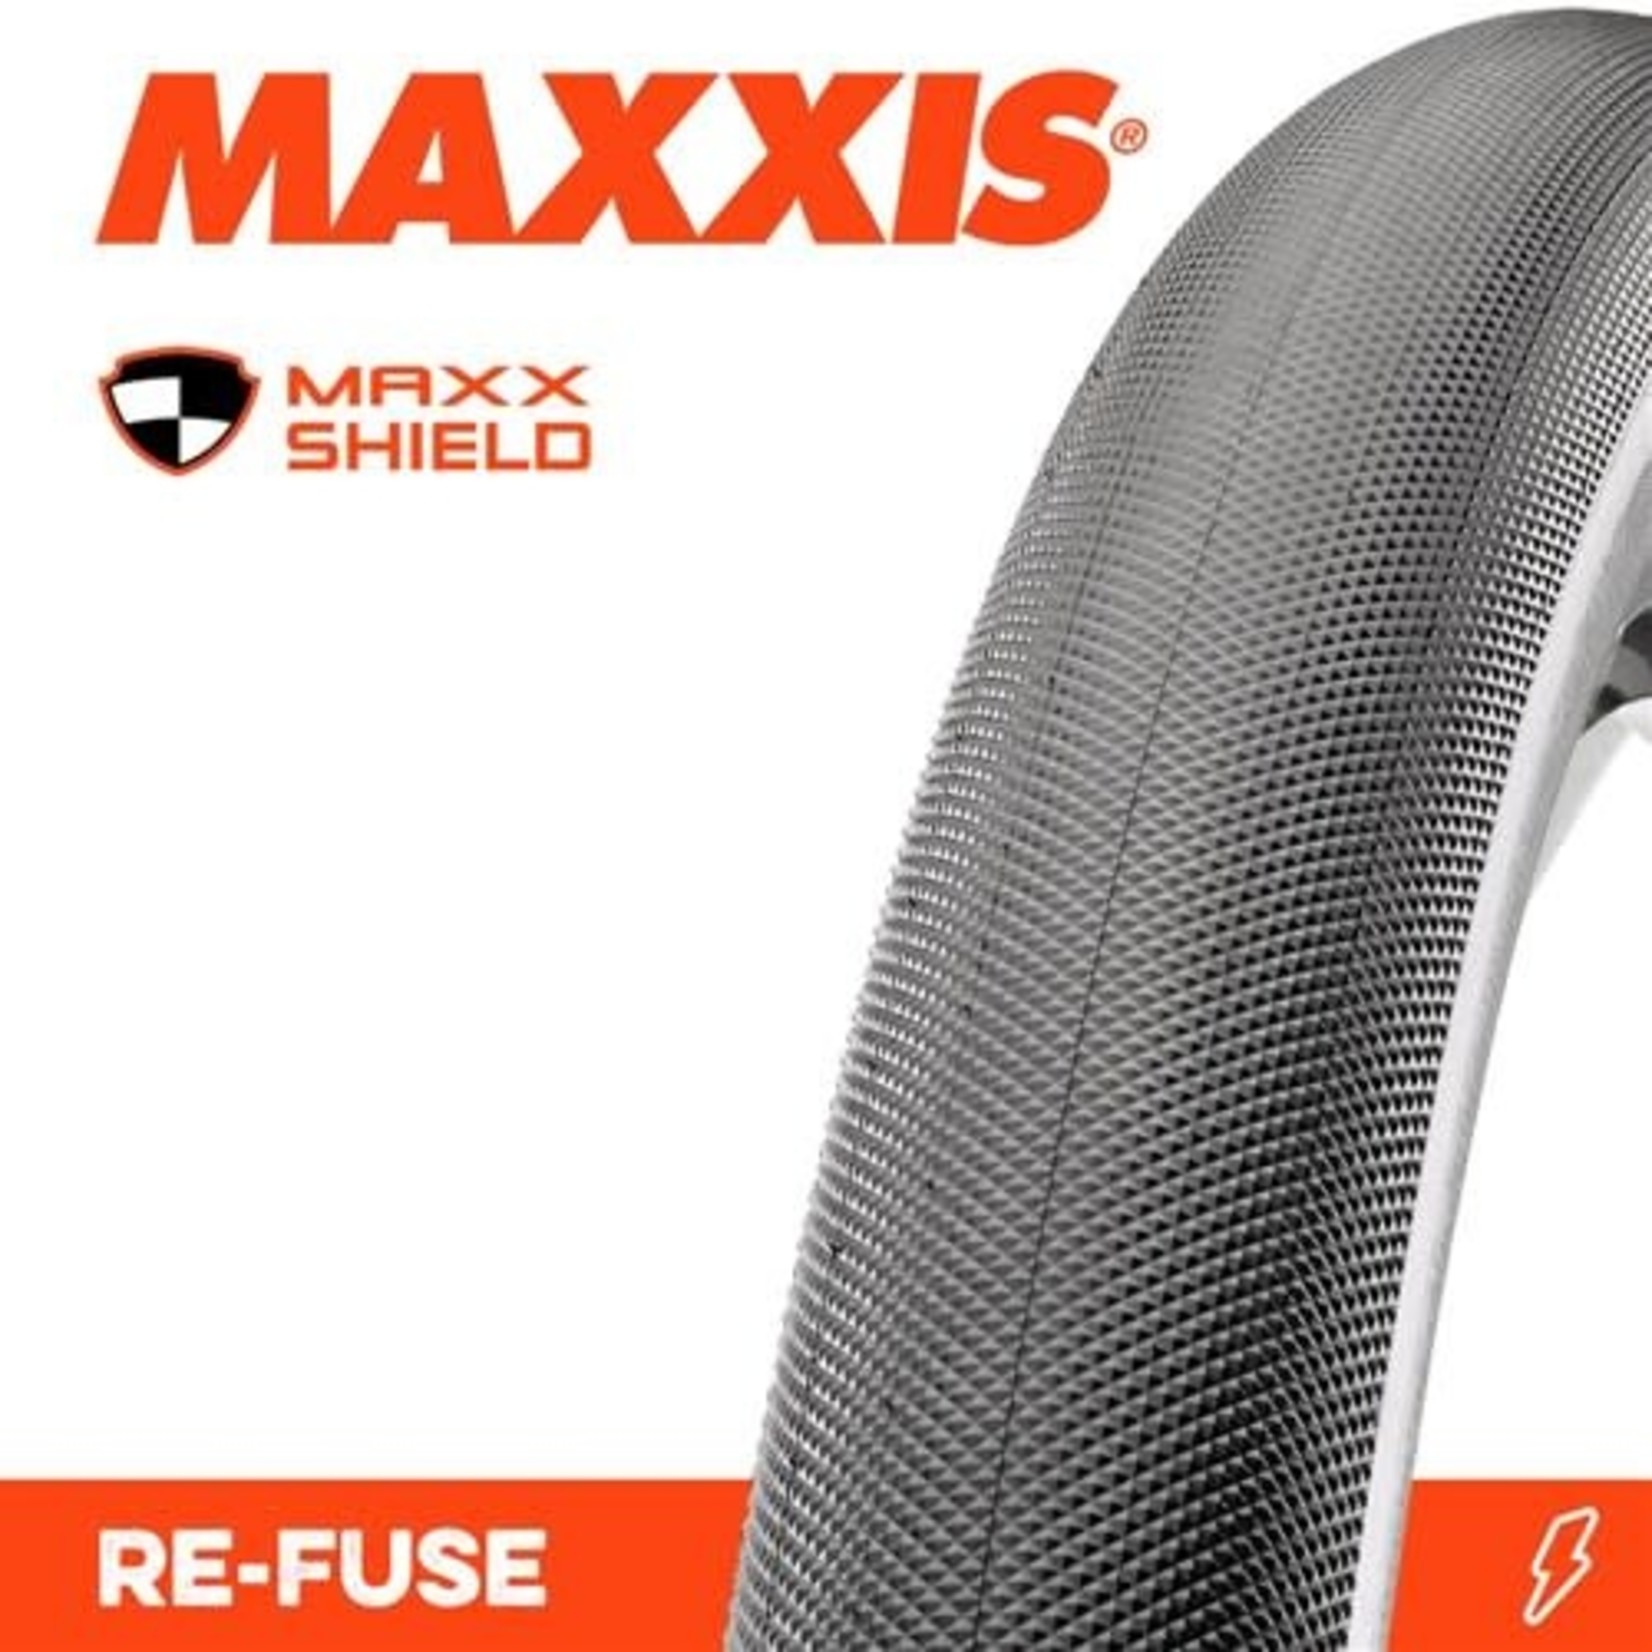 MAXXIS MAXXIS RE-FUSE TYRE